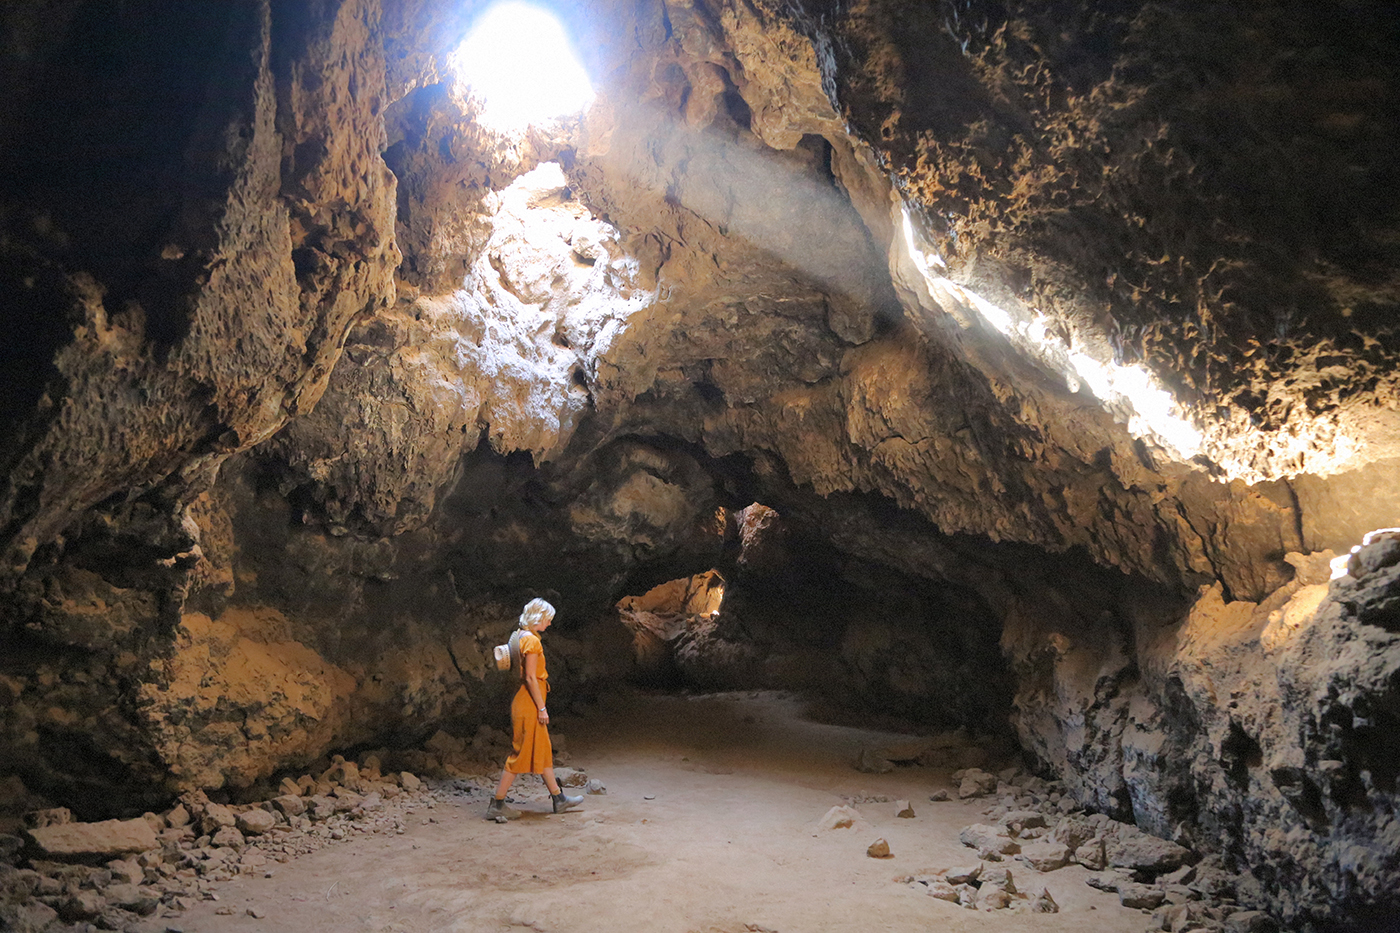 A woman walking through some lava tubes in Mojave National Preserve, California.